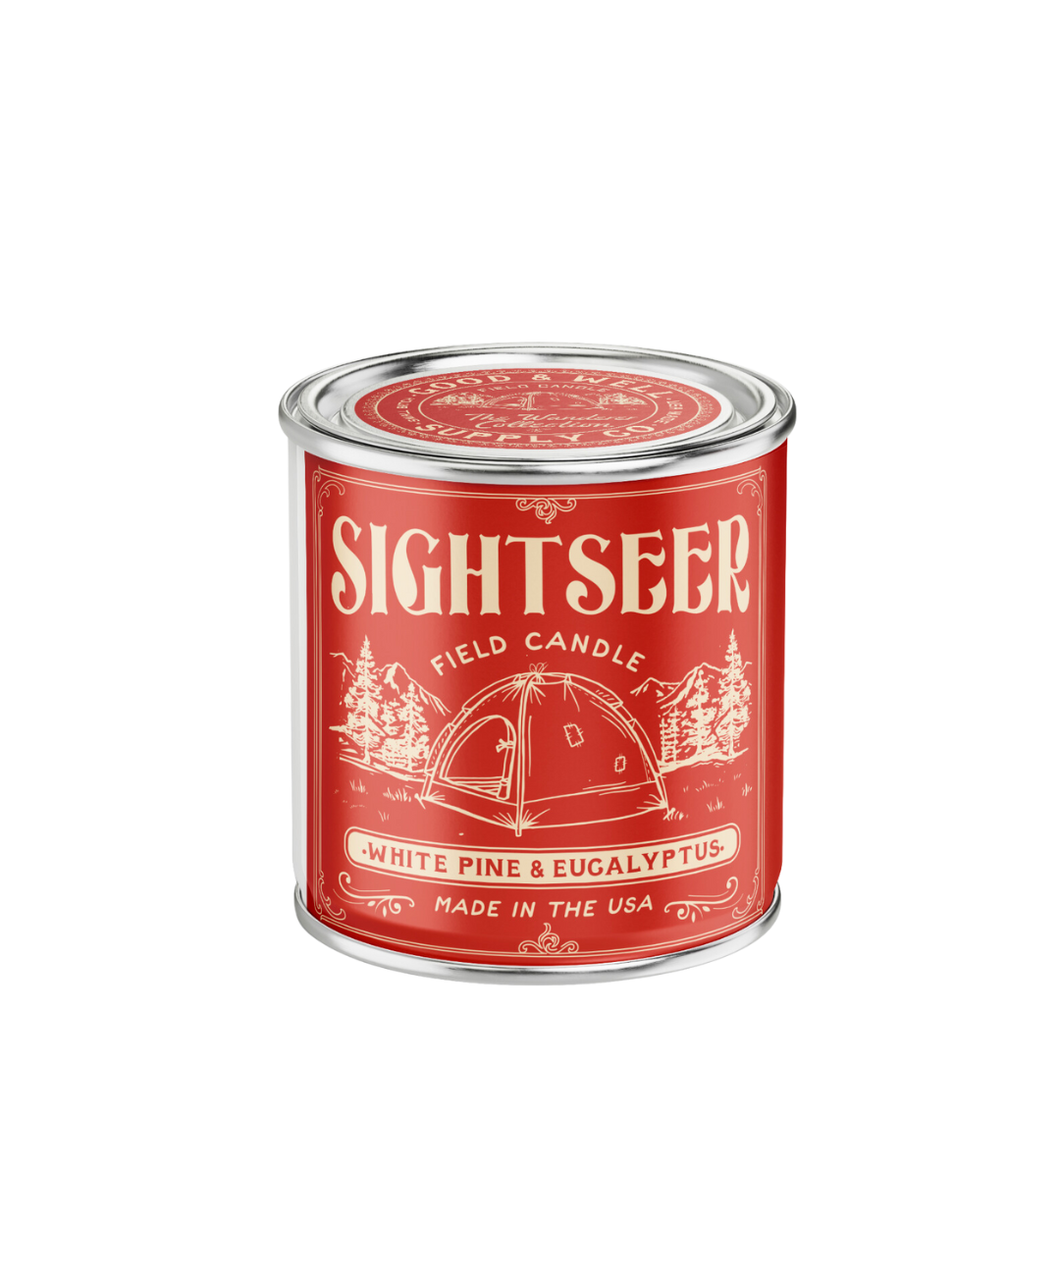 Sightseer Field Candle: 1/2 Pint